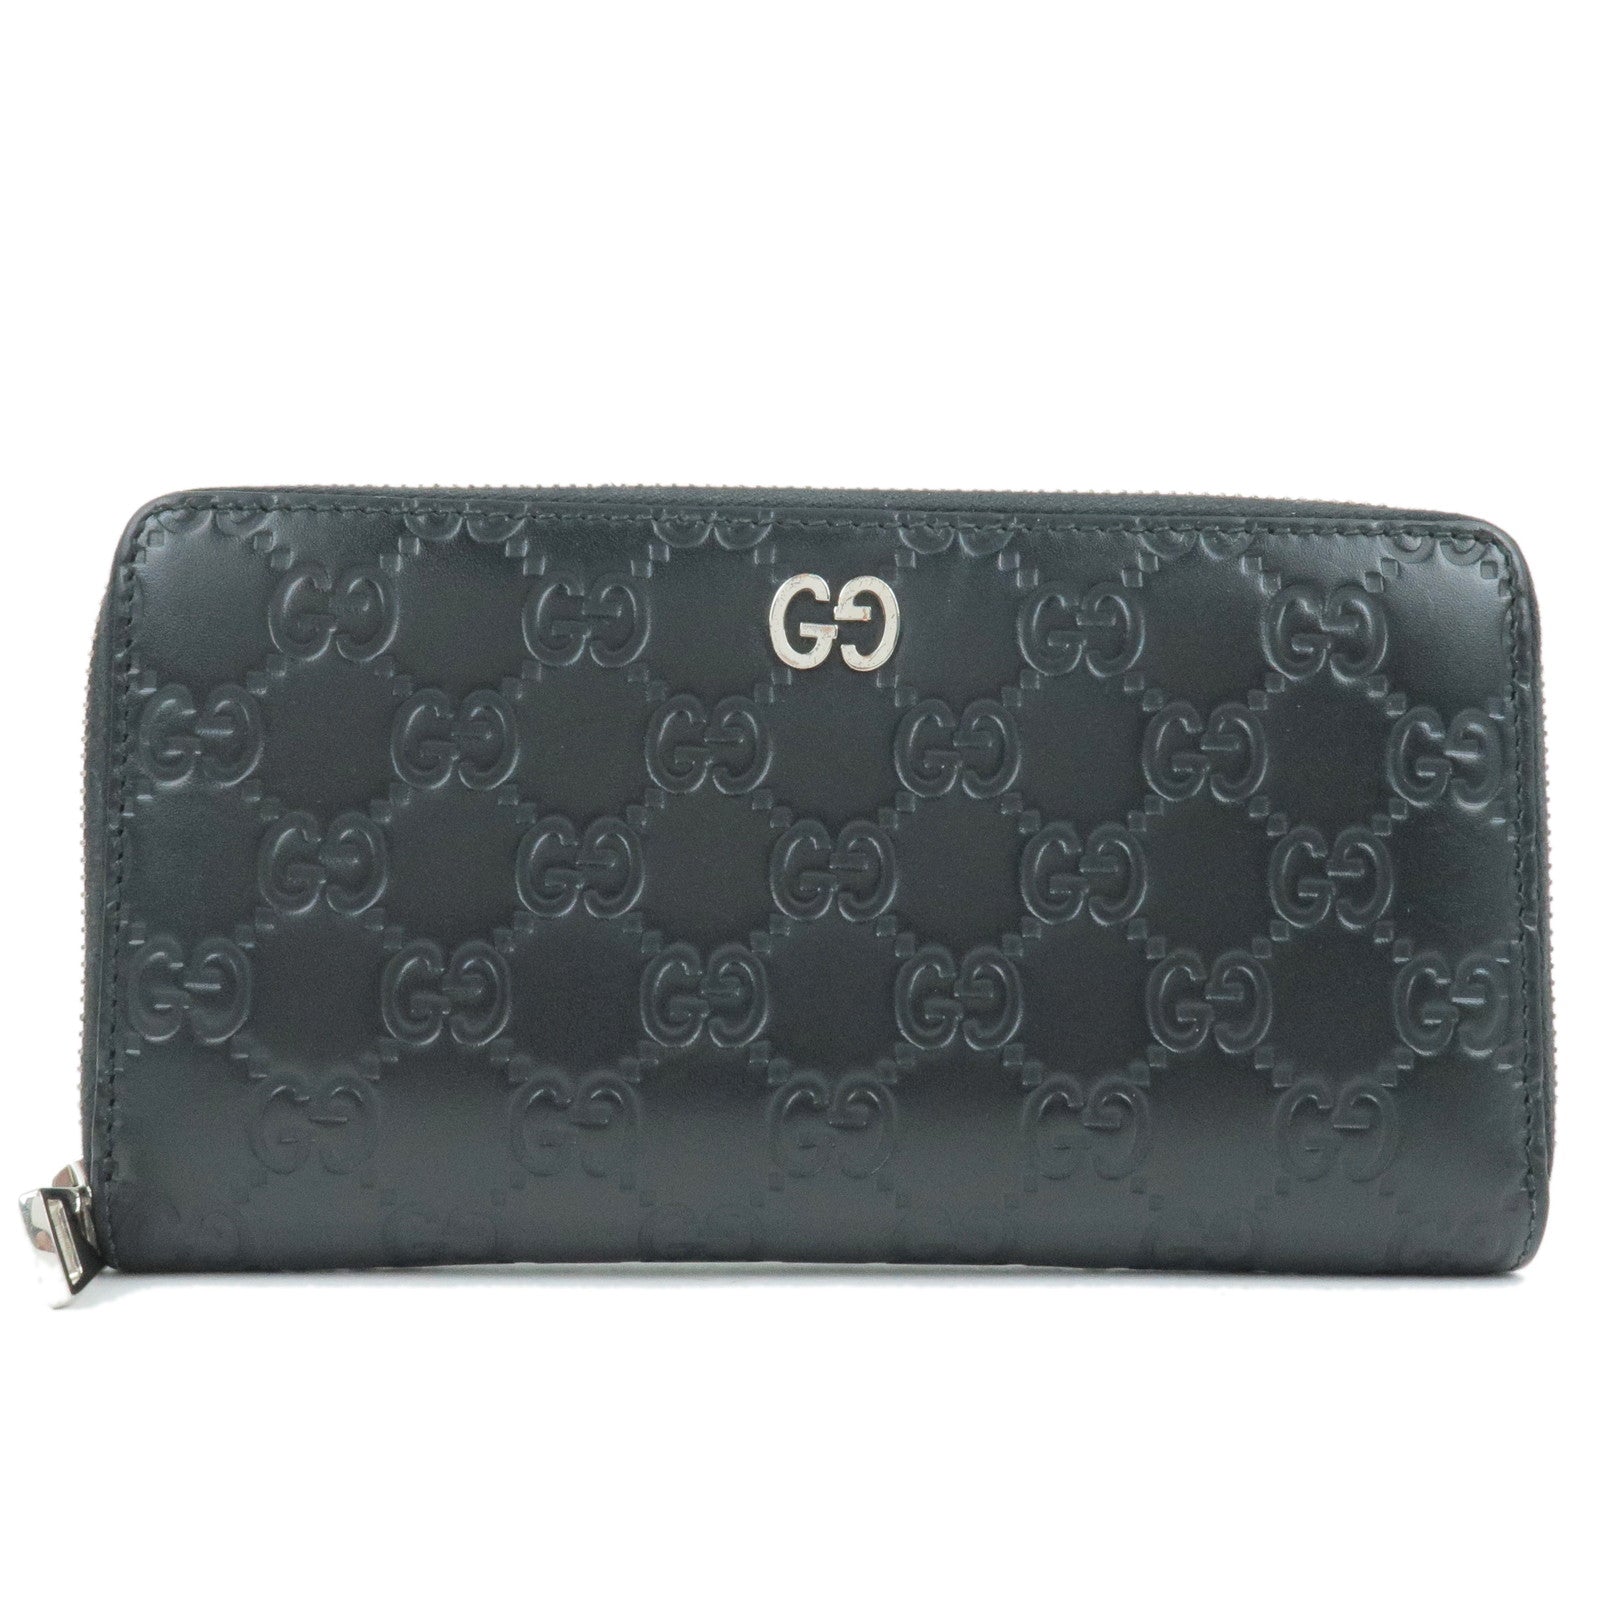 GUCCI-Guccissima-Leather-Round-Zippy-Long-Wallet-Black-473928